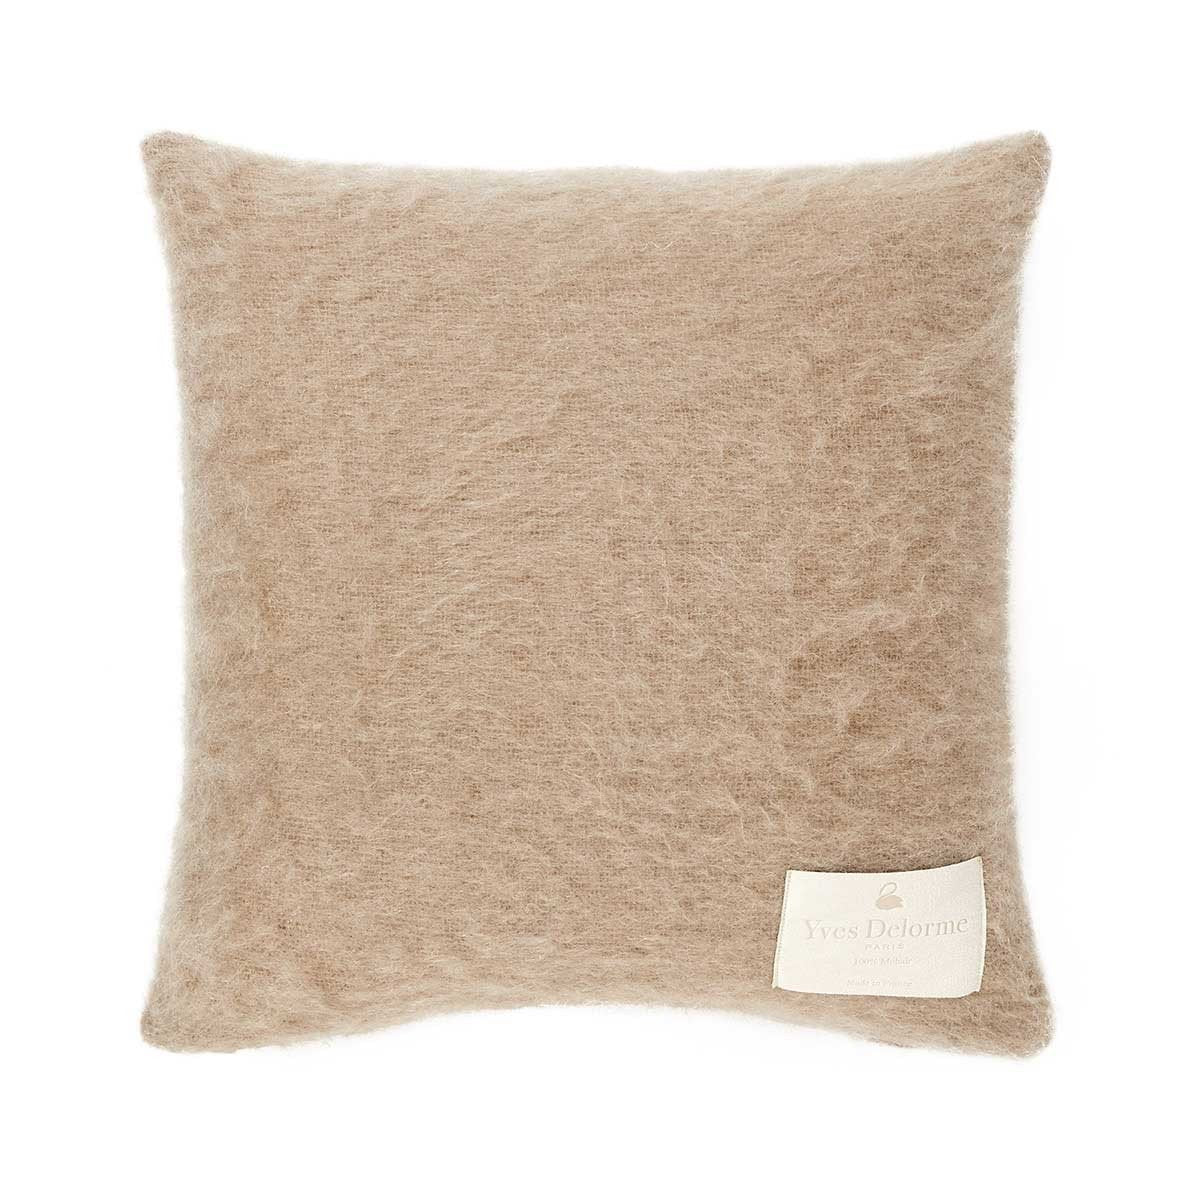 Fig Linens - Noisette Mohair Decorative Pillow by Yves Delorme - Back